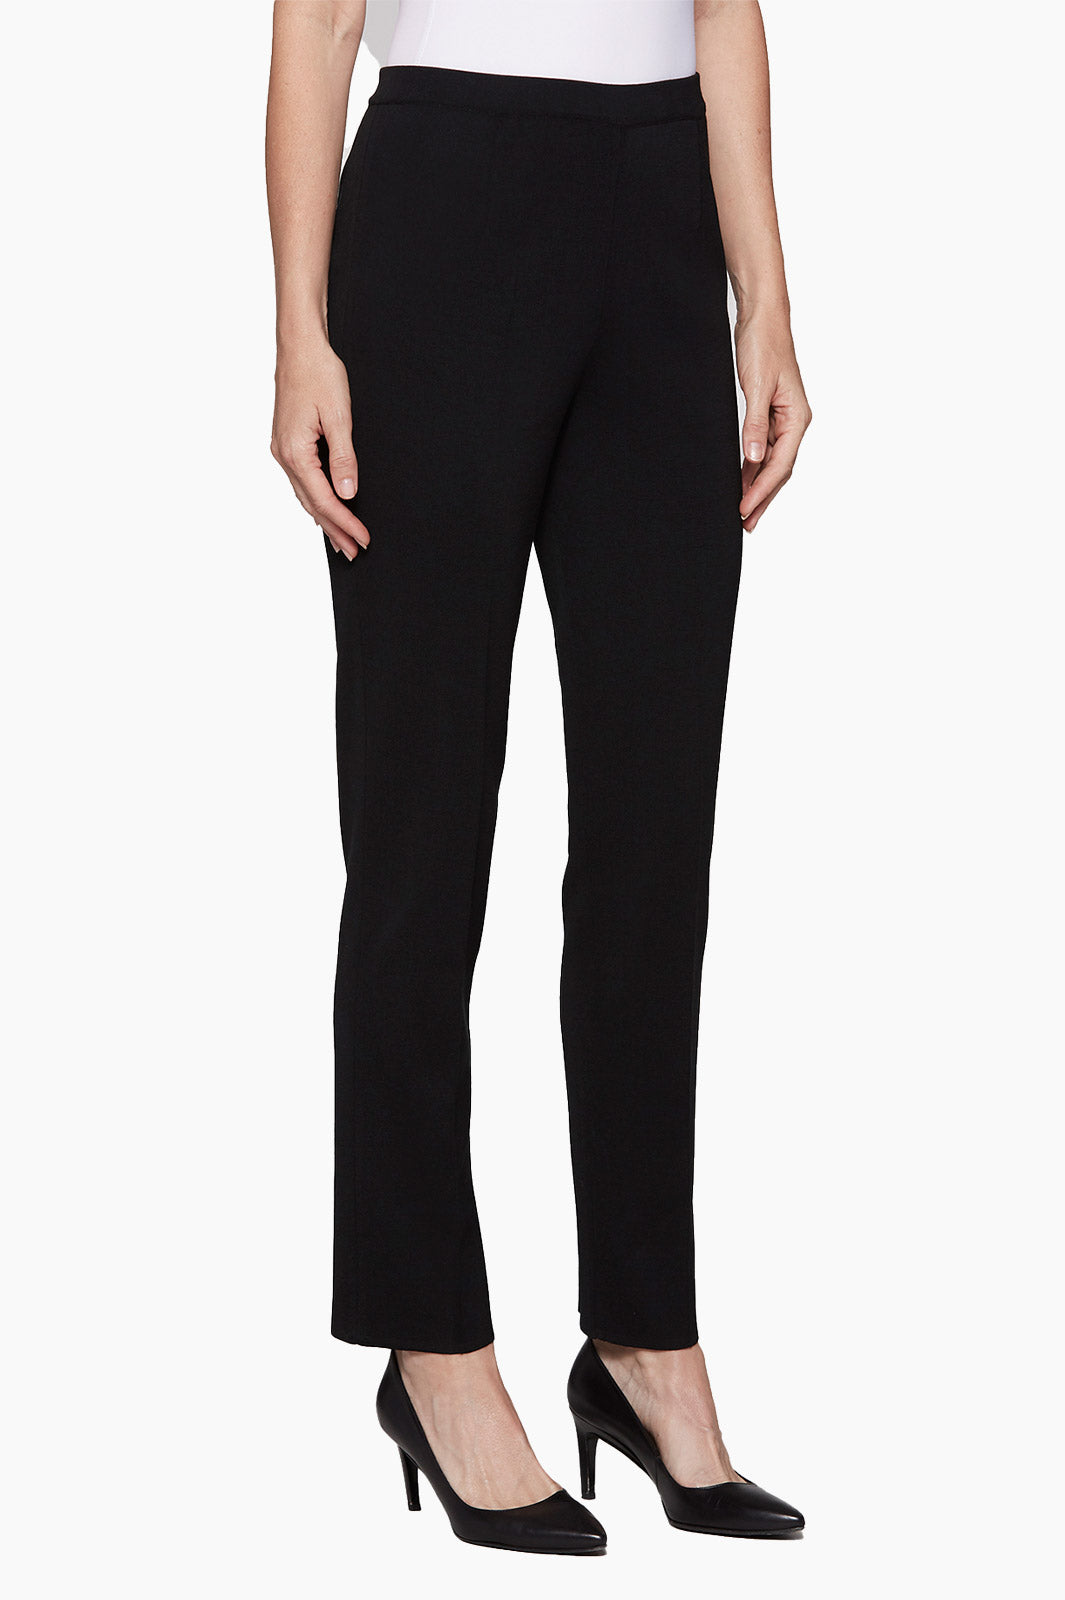 Buy Black Knitted Women Straight Pants Online - W for Woman